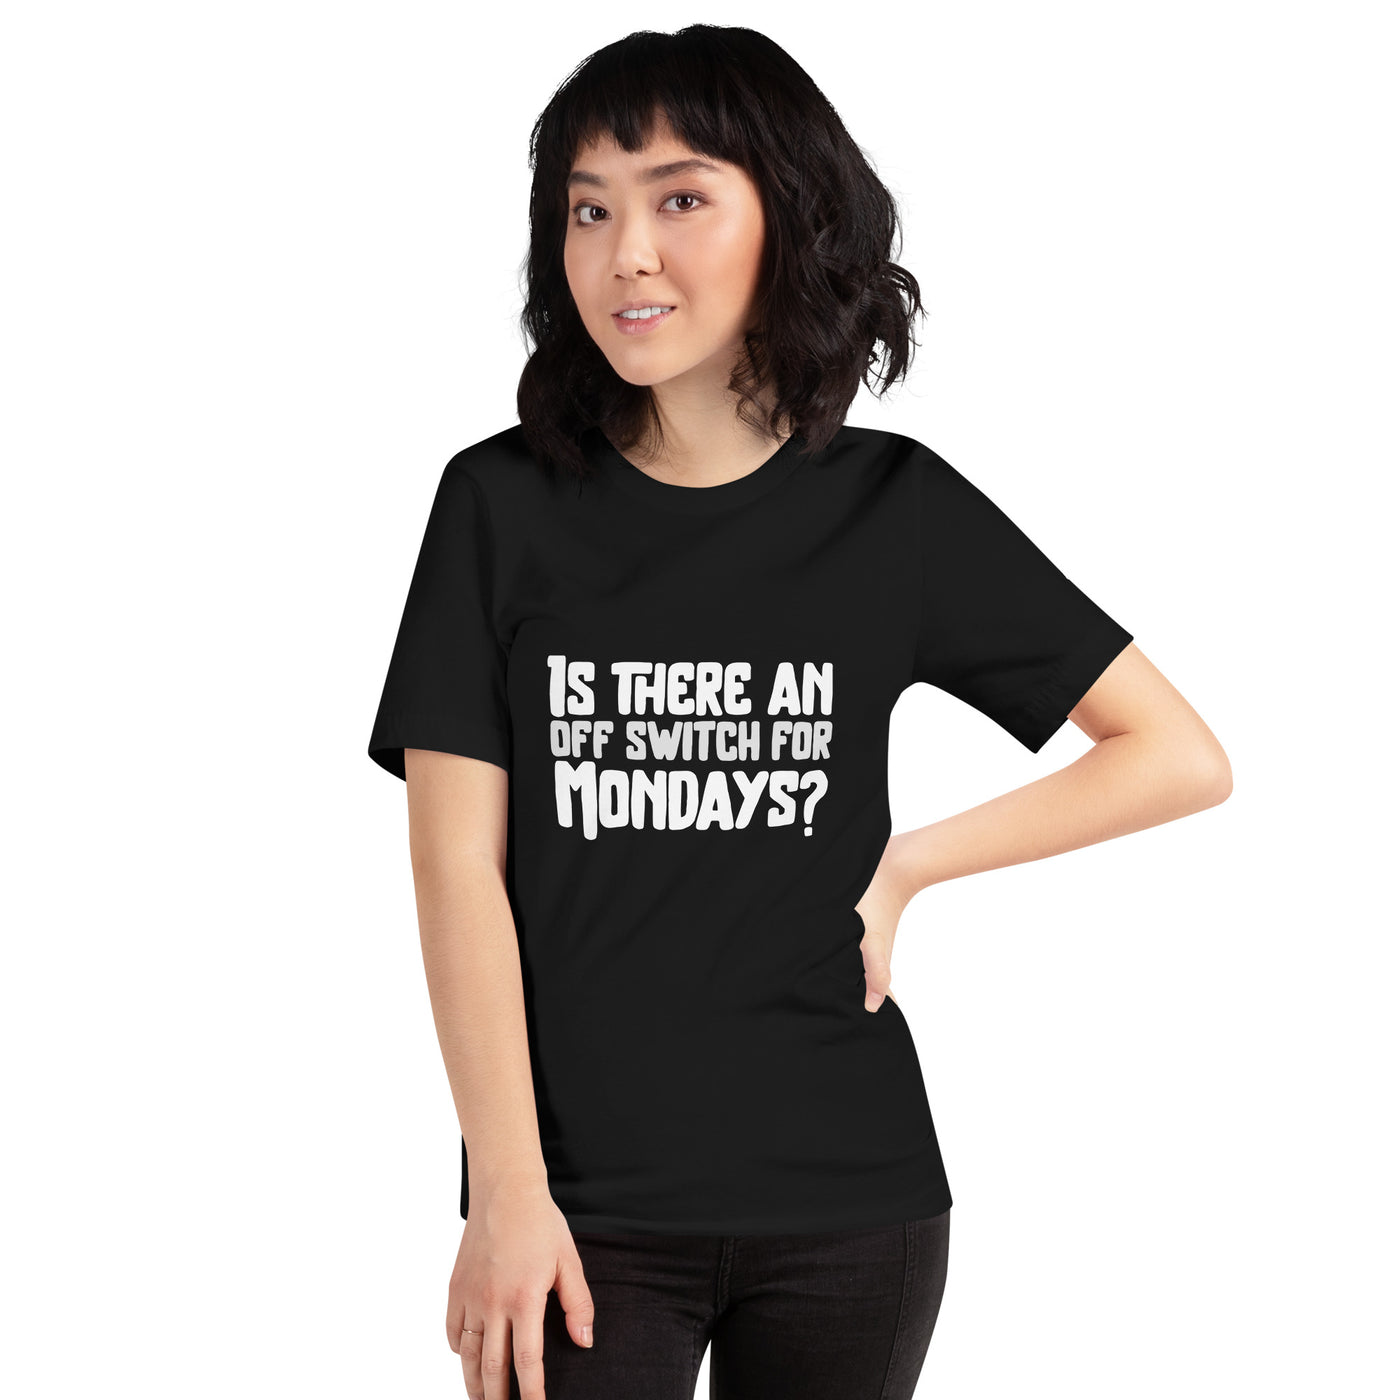 Is there an OFF switch for Mondays? - Unisex t-shirt